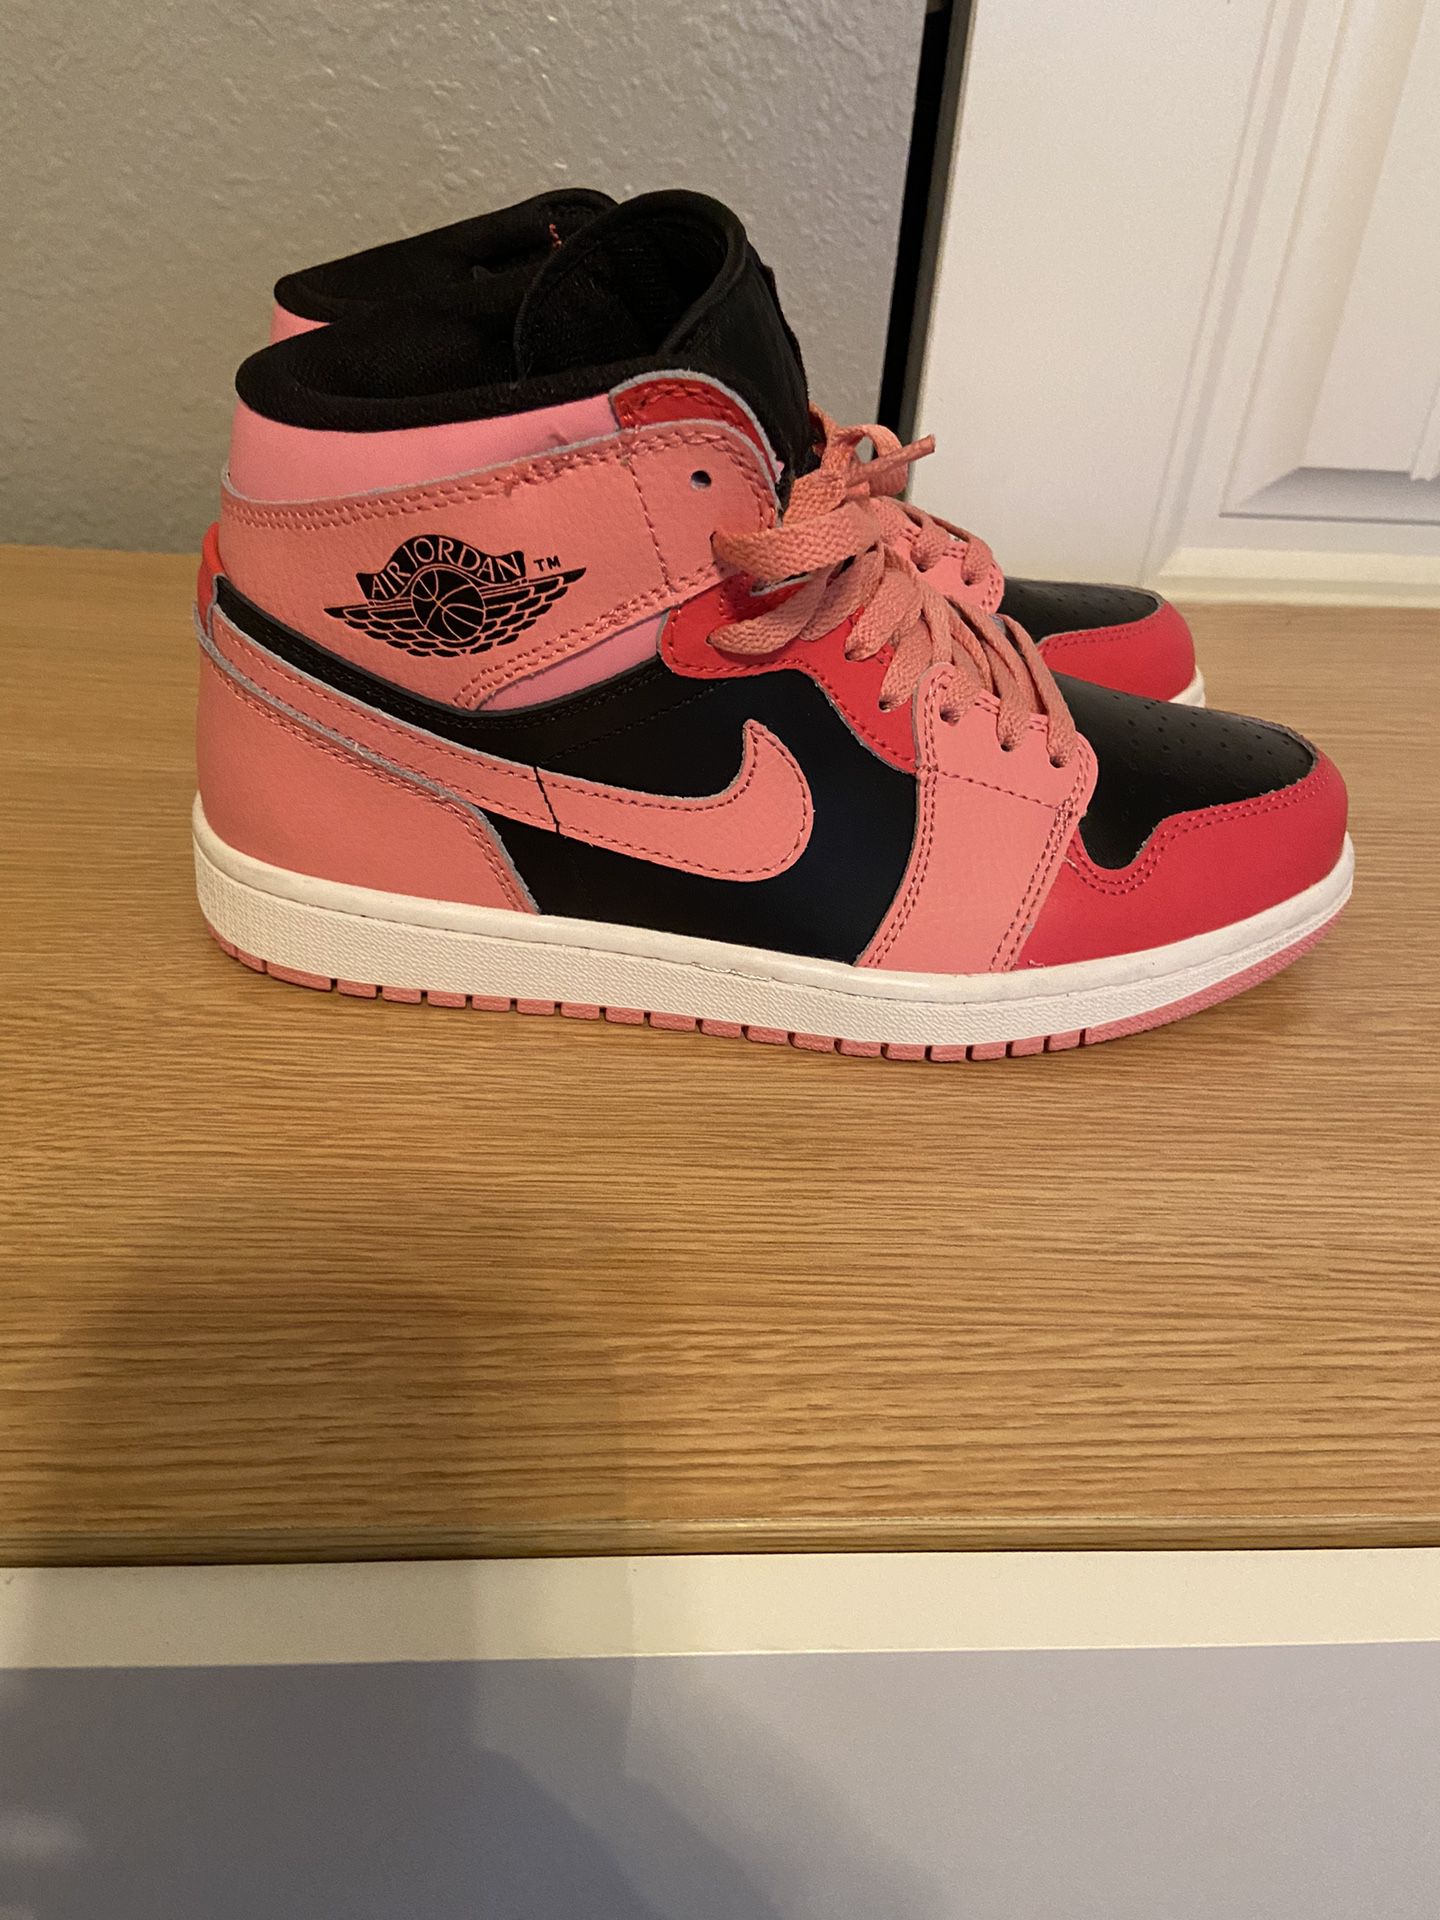 Nike Air Woman’s Size 8.5 (New)